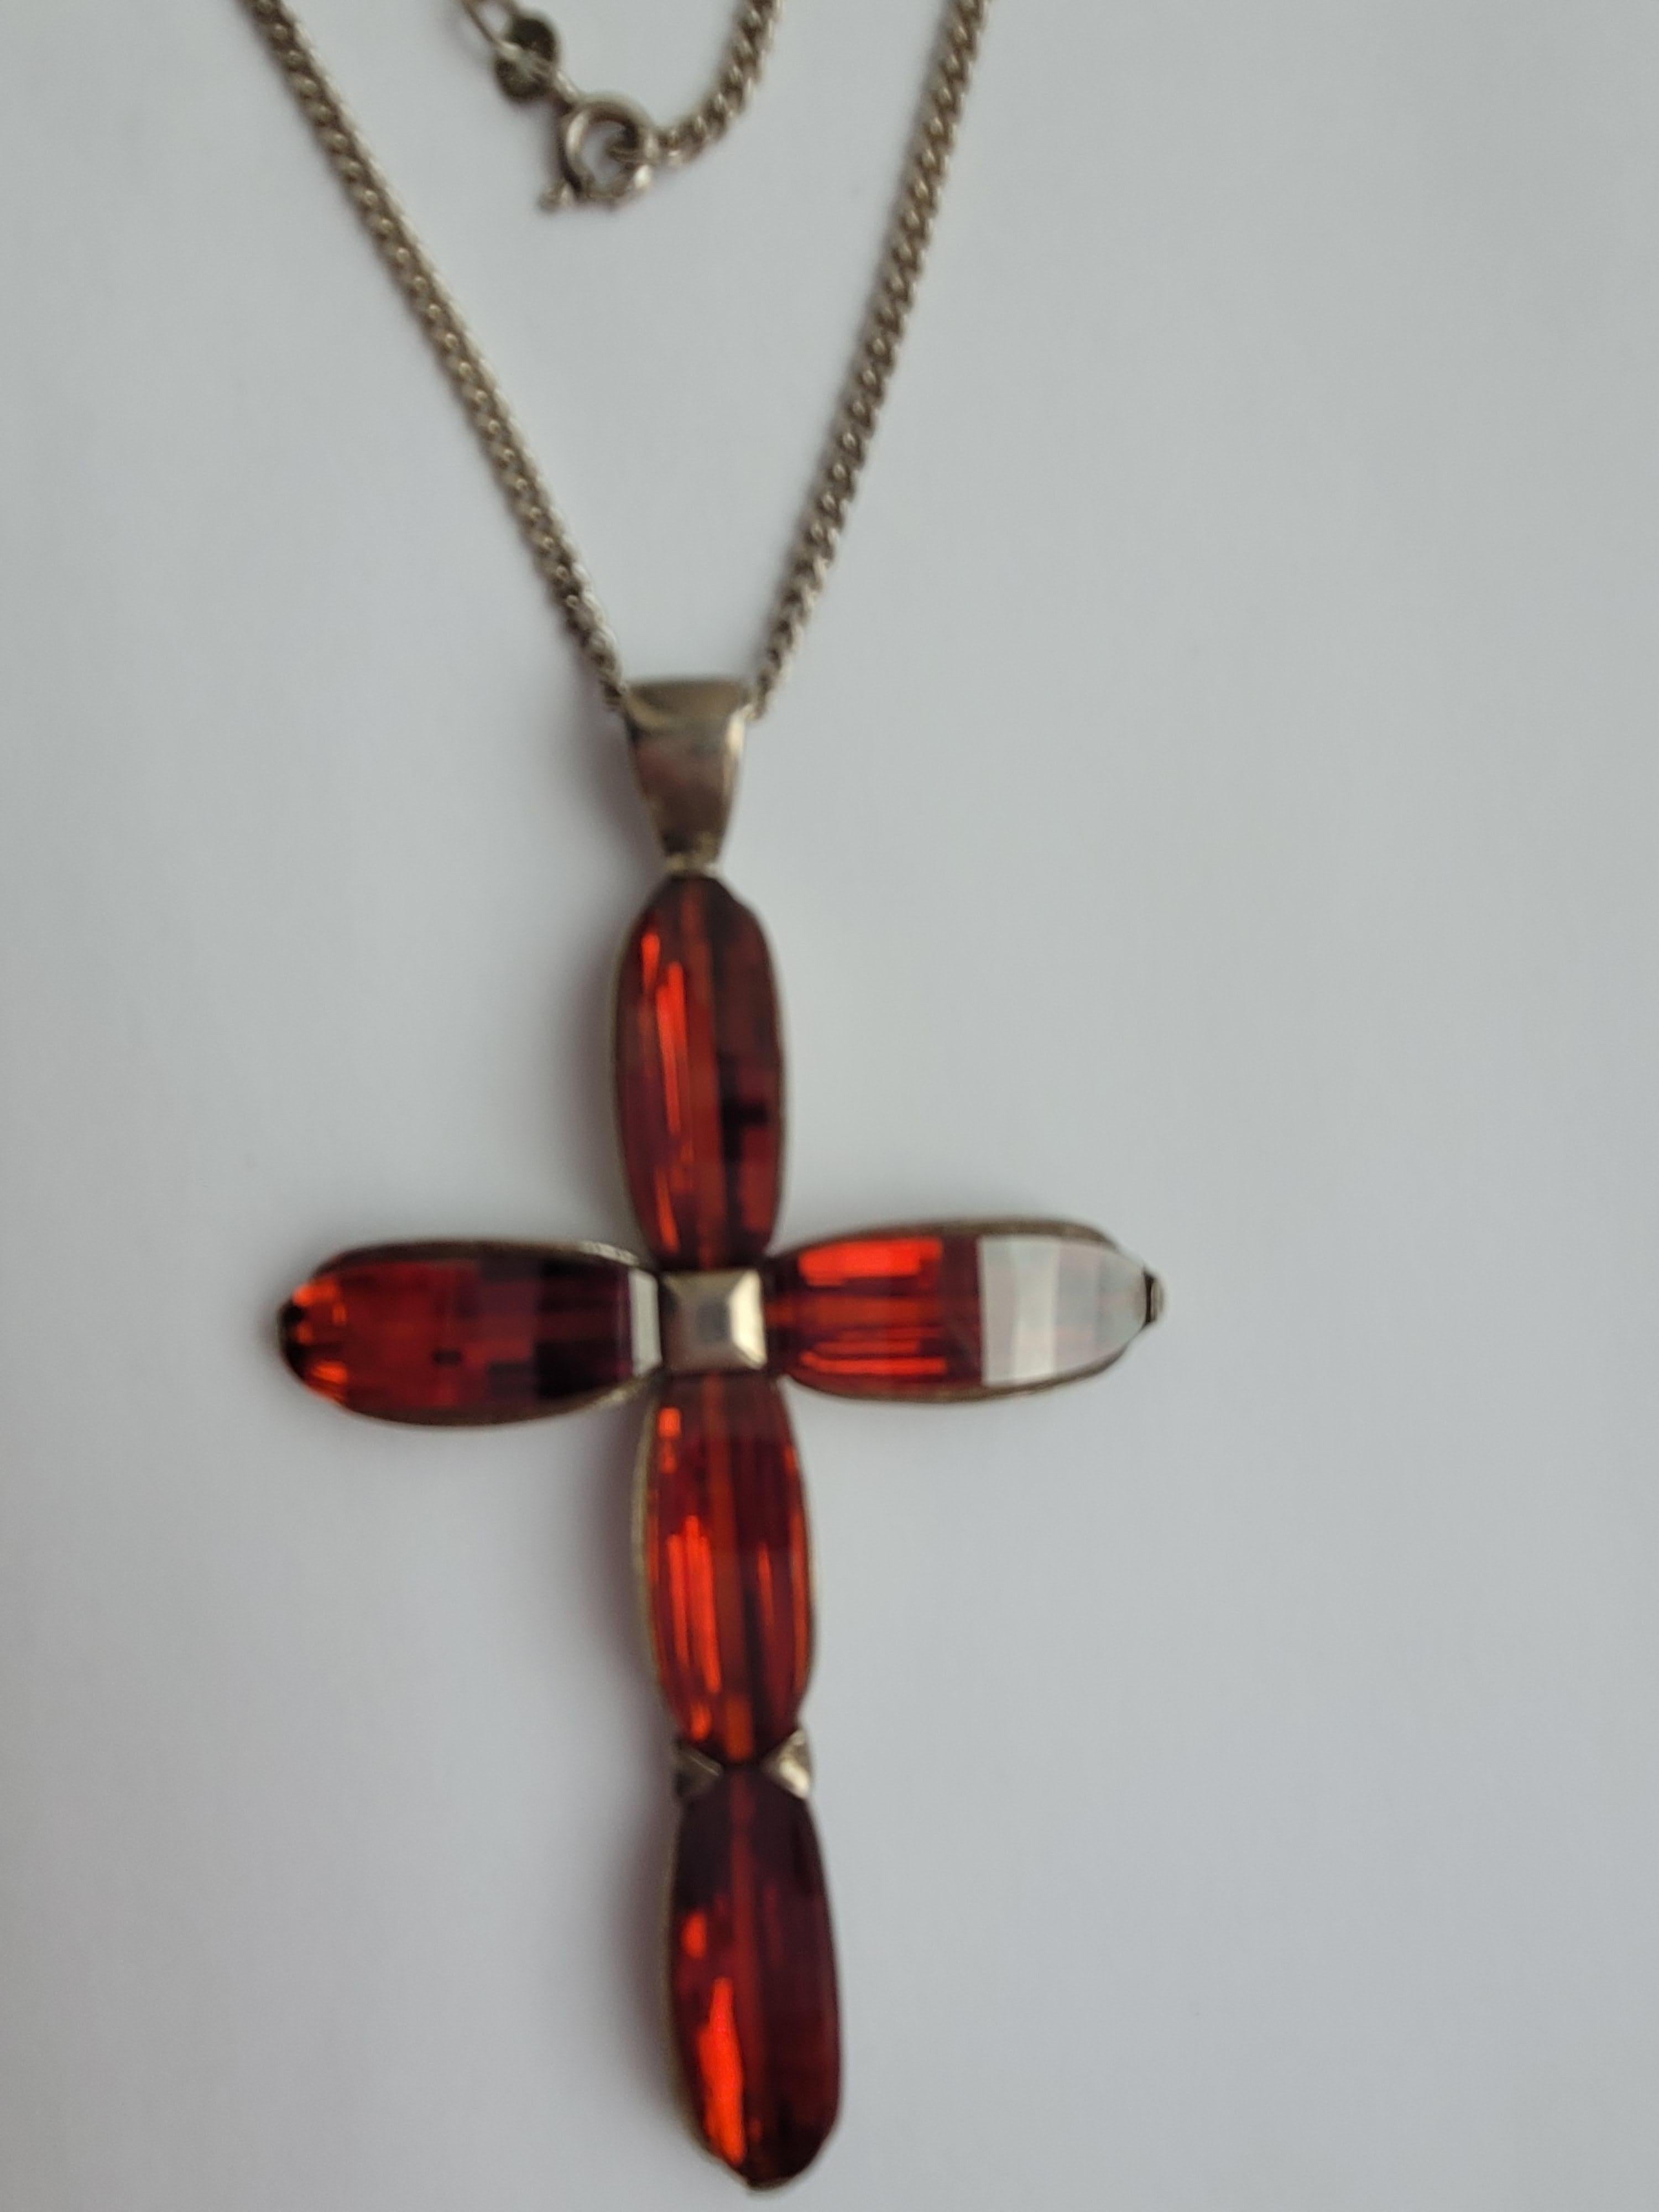 A Stunning and Very Unique Fancy cut bridge shape Hessonite Garnet and solid Sterling Silver large cross pendant on Sterling Silver chain. An impressive and eye-catching necklace.

Total drop of the pendant 71mm, width 43mm.
Length of the chain 49cm